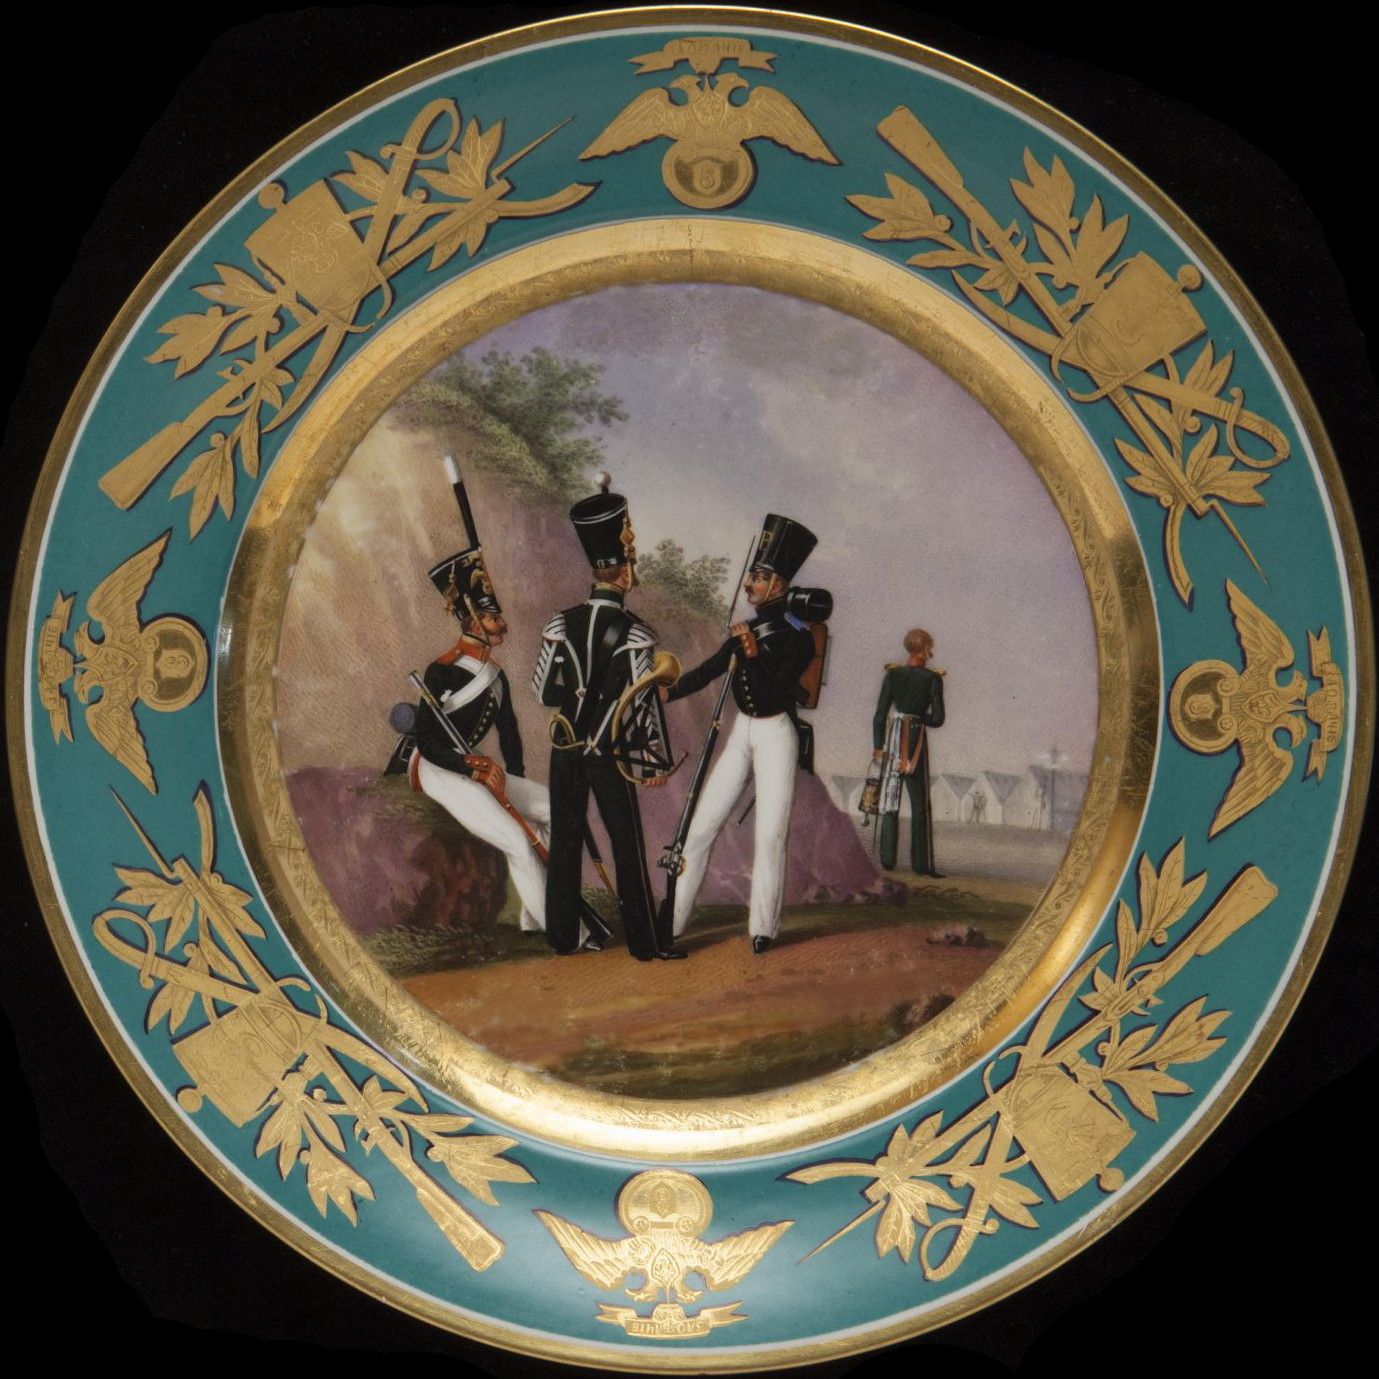 Russian Imperial Porcelain Factory military plate with turquoise border depicting Infantry soldiers and officers